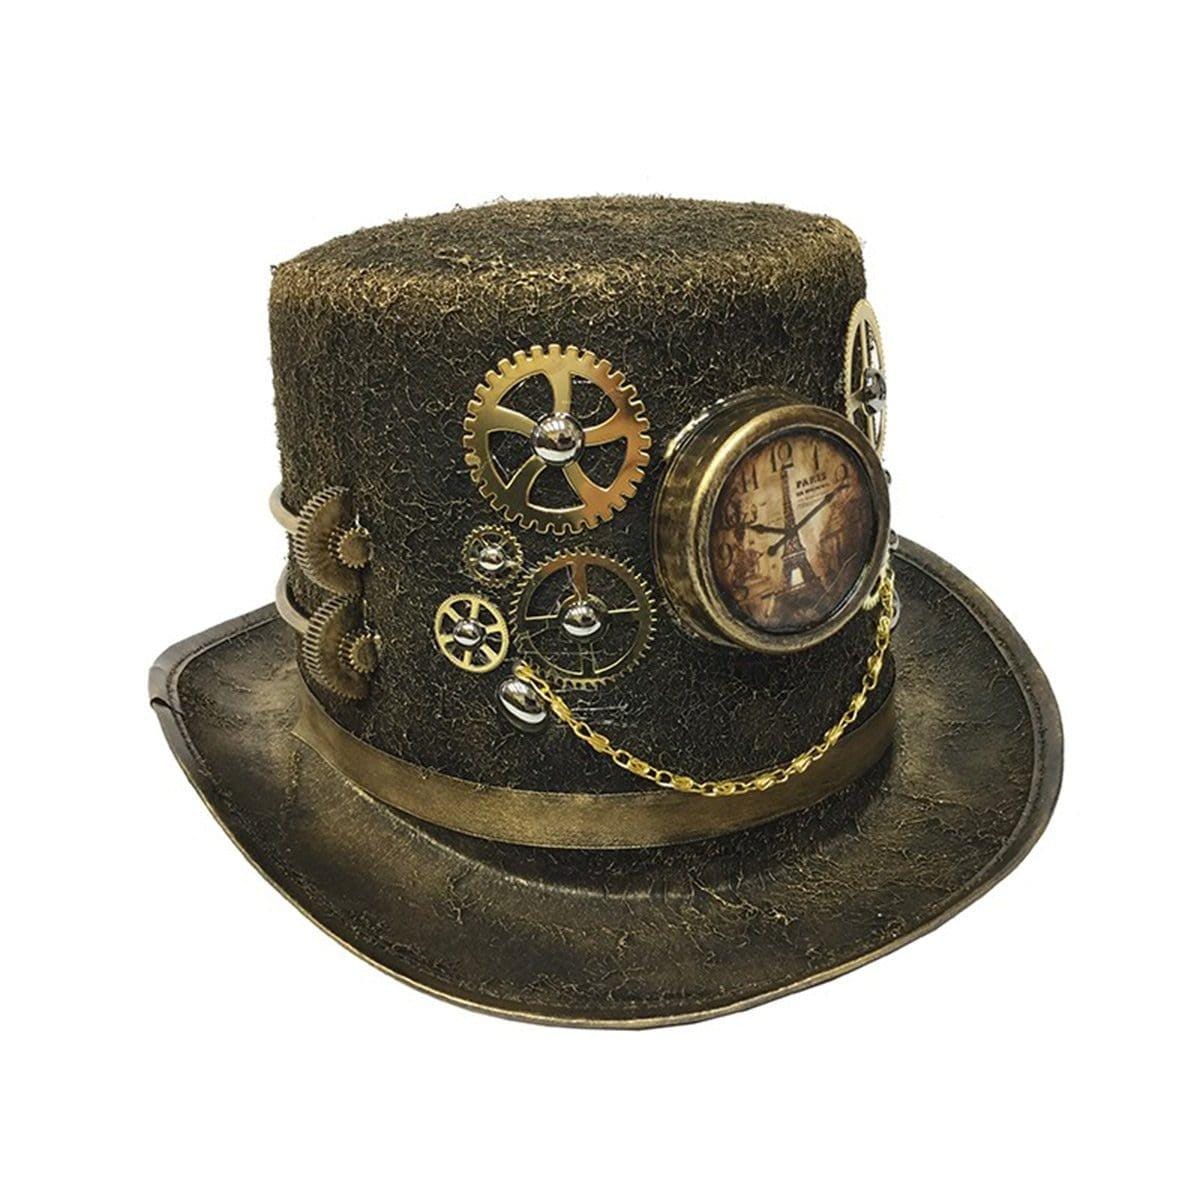 Buy Costume Accessories Steampunk hat with clock sold at Party Expert